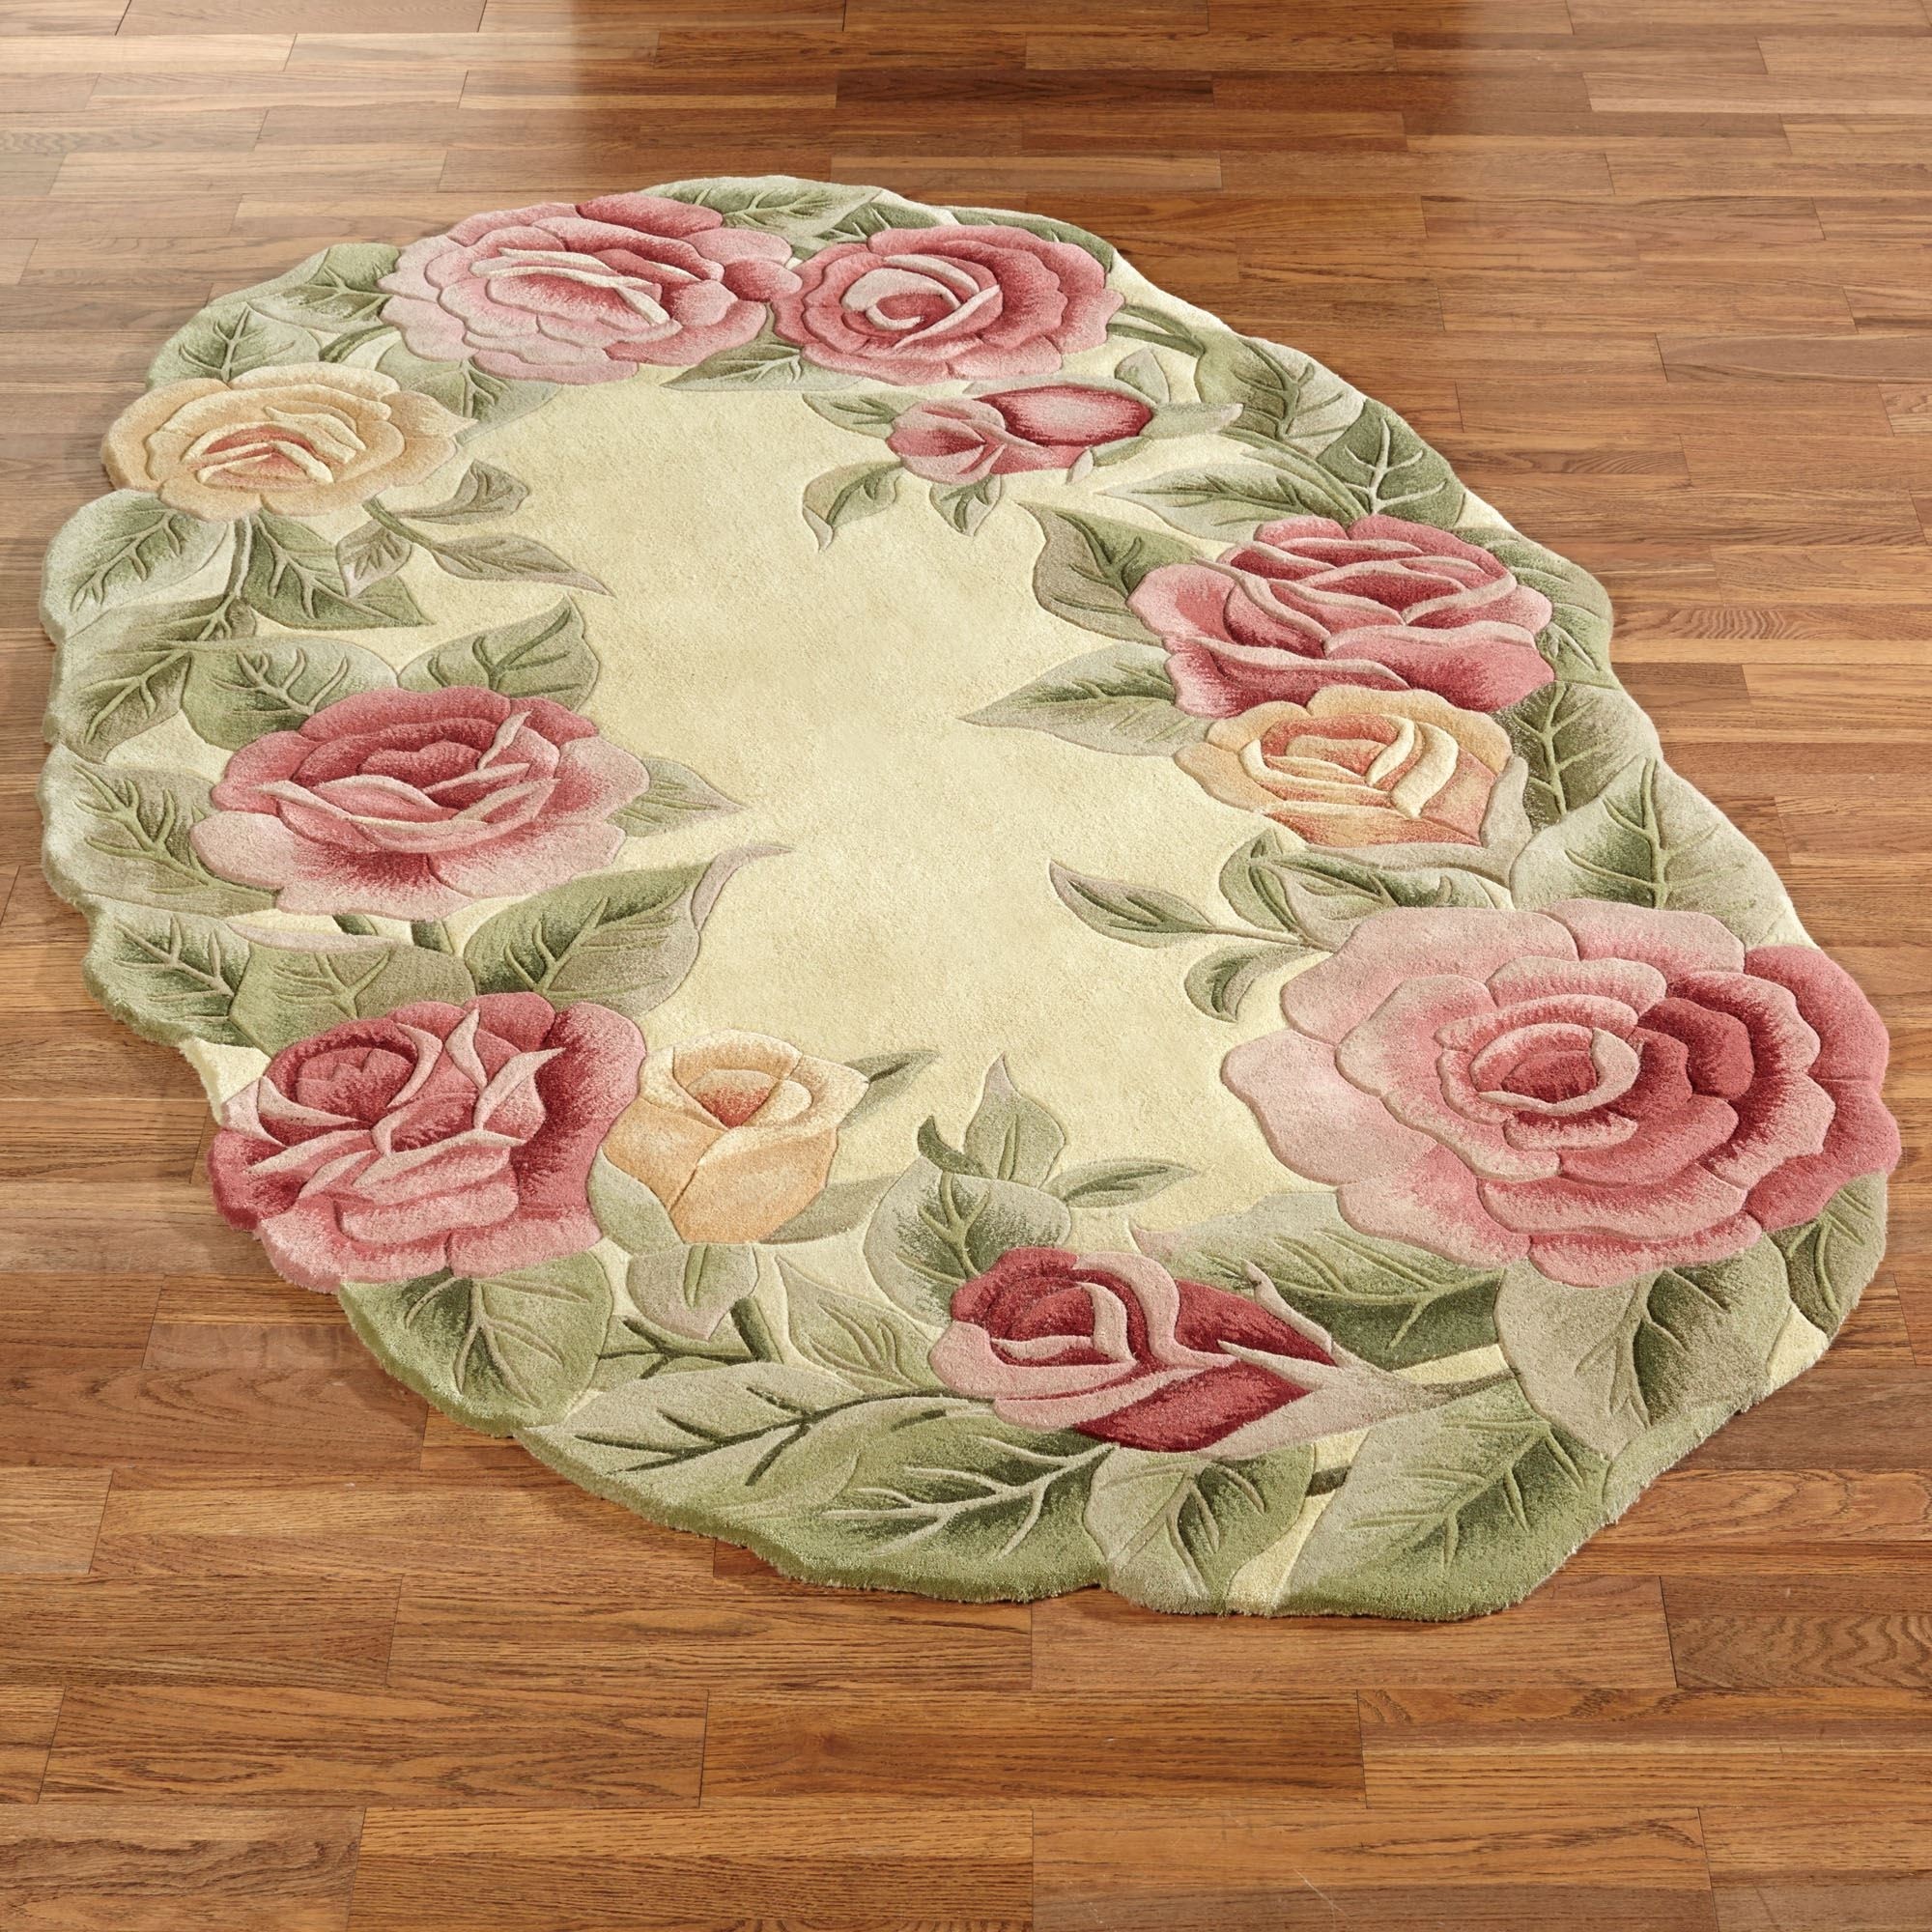 Roses oval rug